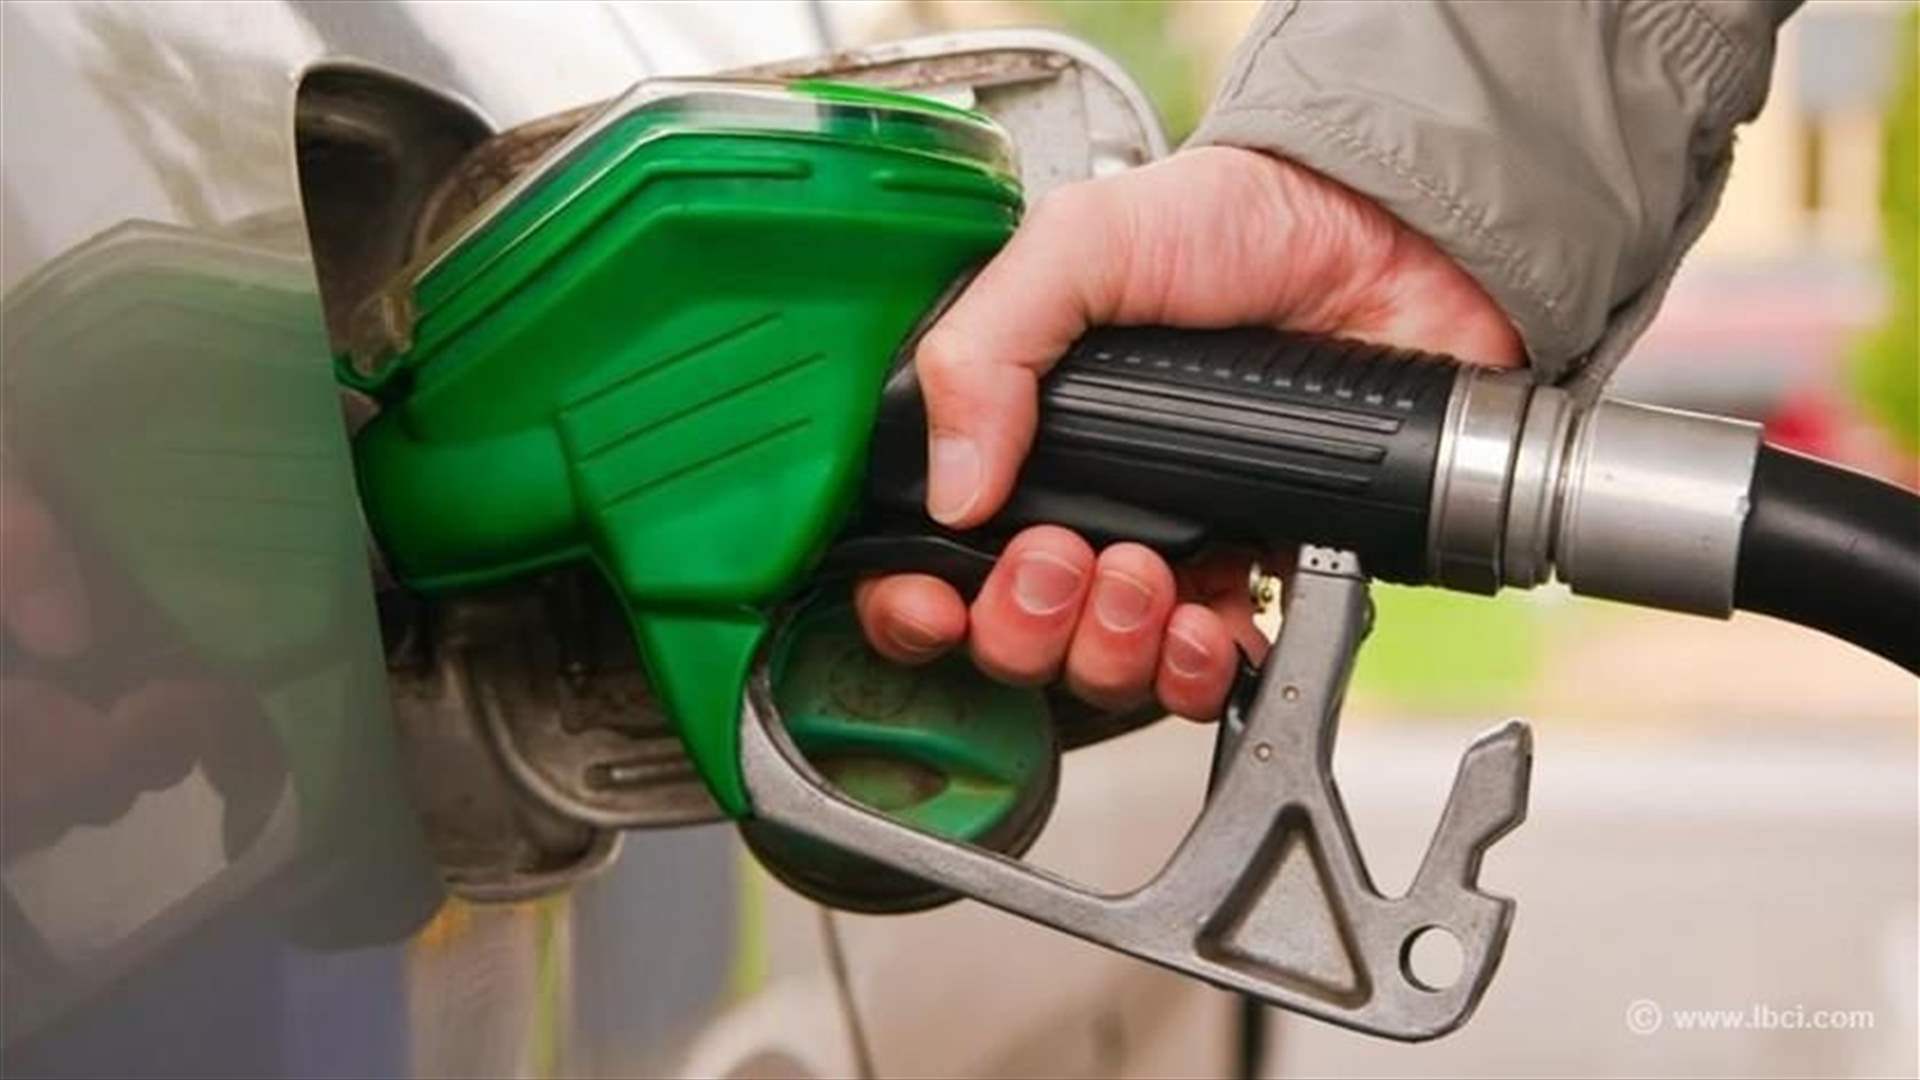 Fuel prices remain stable in Lebanon